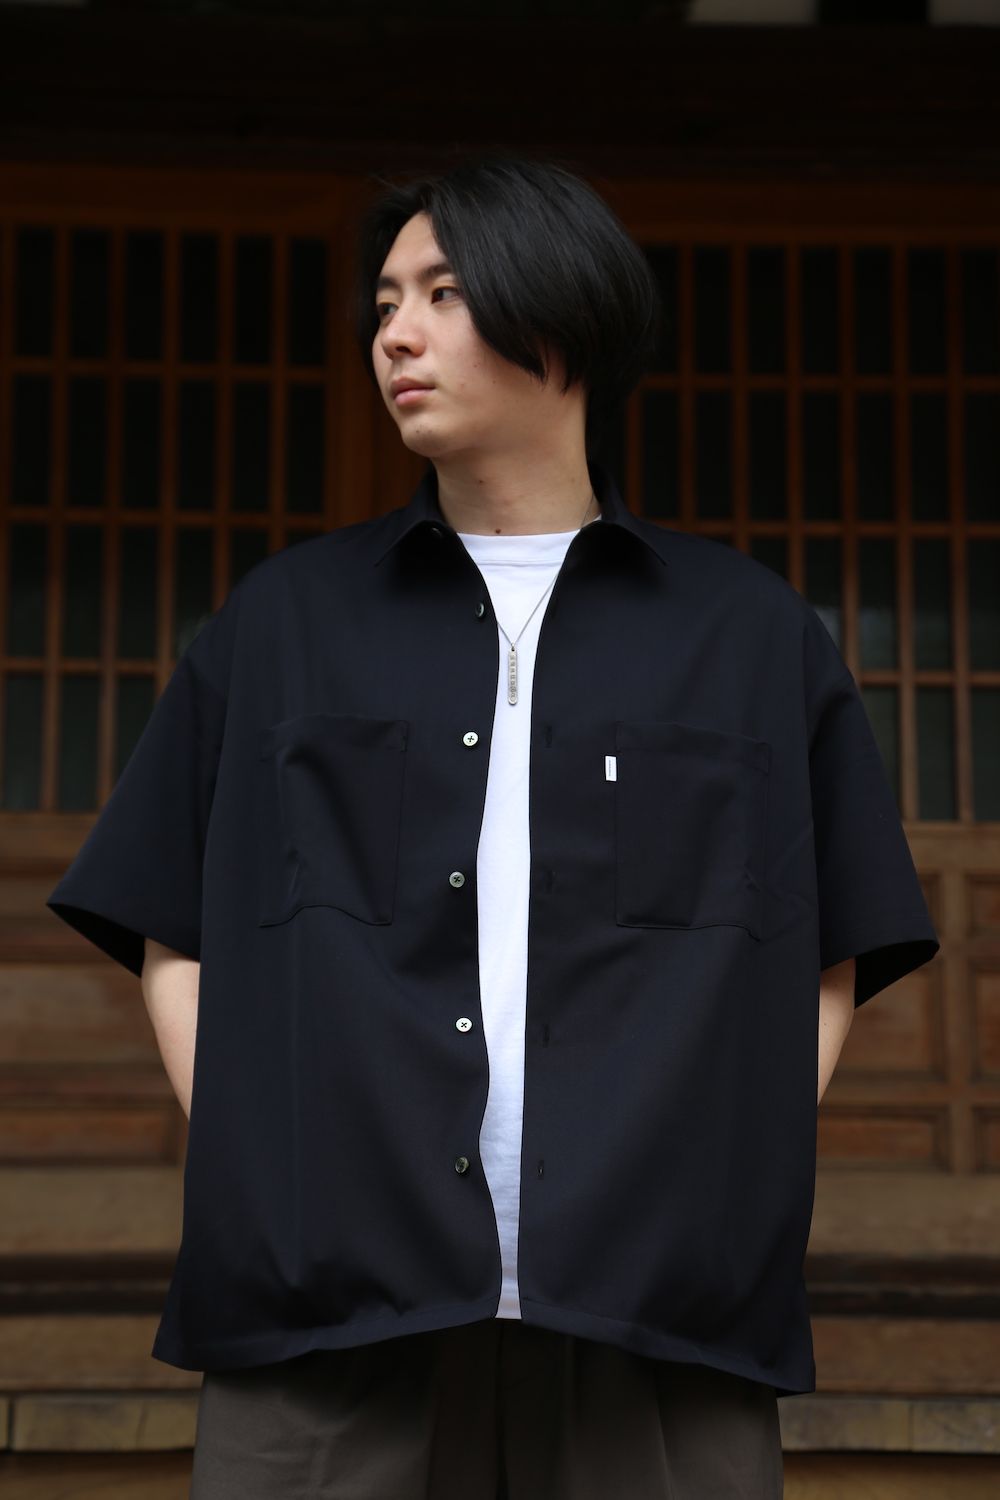 『Graphpaper』Selvage Wool L/S Box Shirt